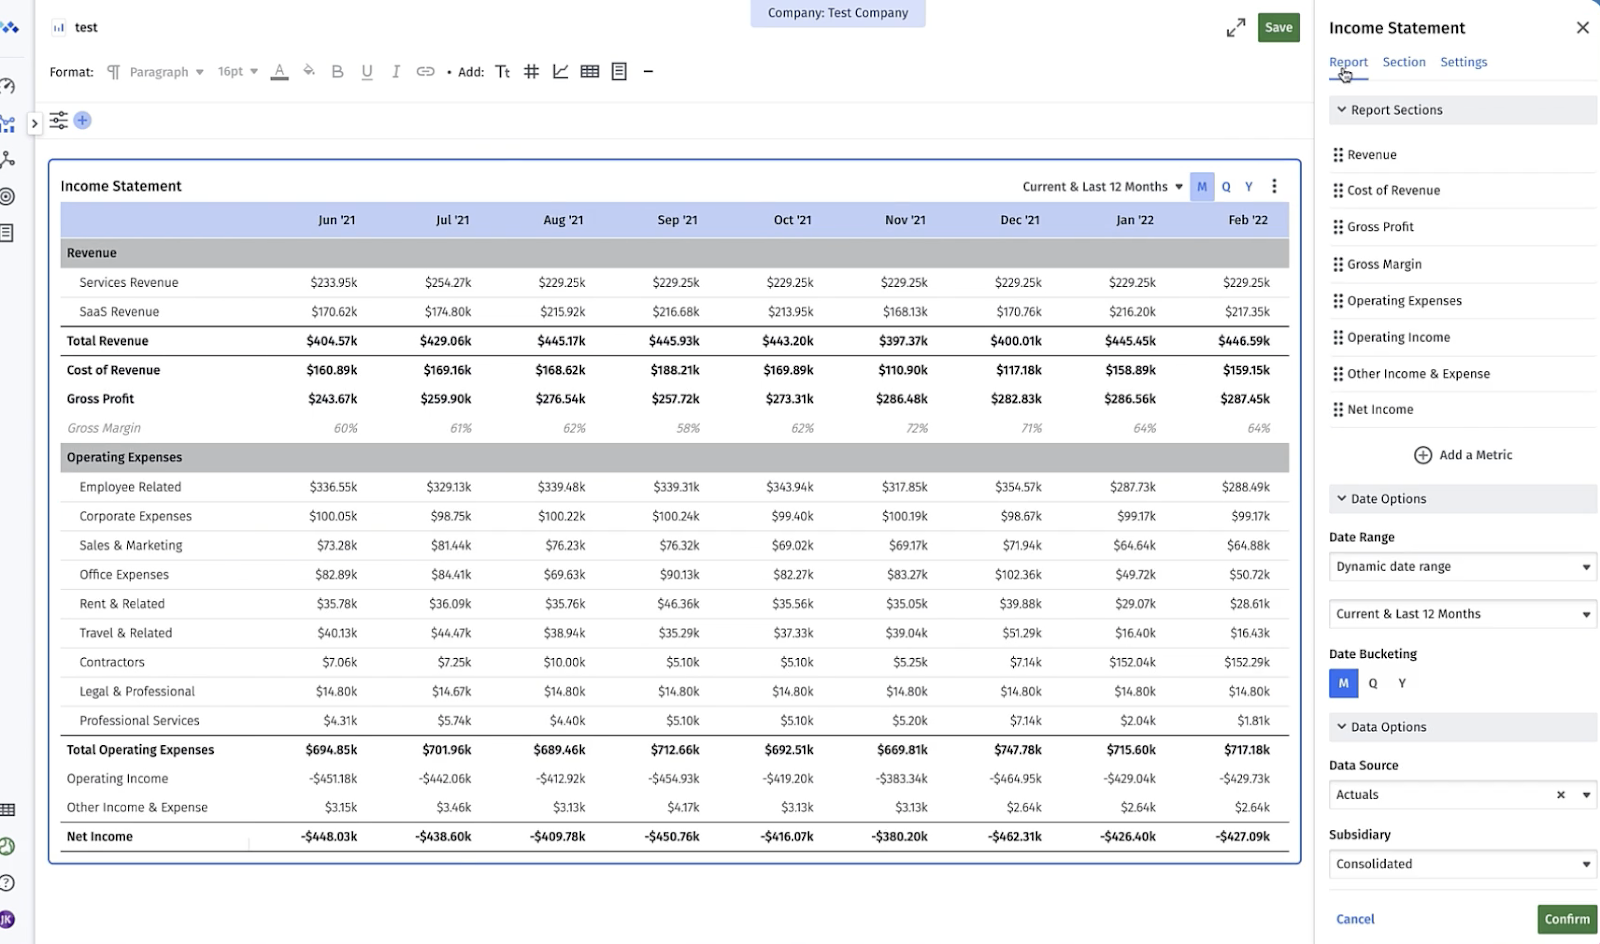 Reports, Sections, and Settings tabs customers can configure as part of custom report building in Mosaic.